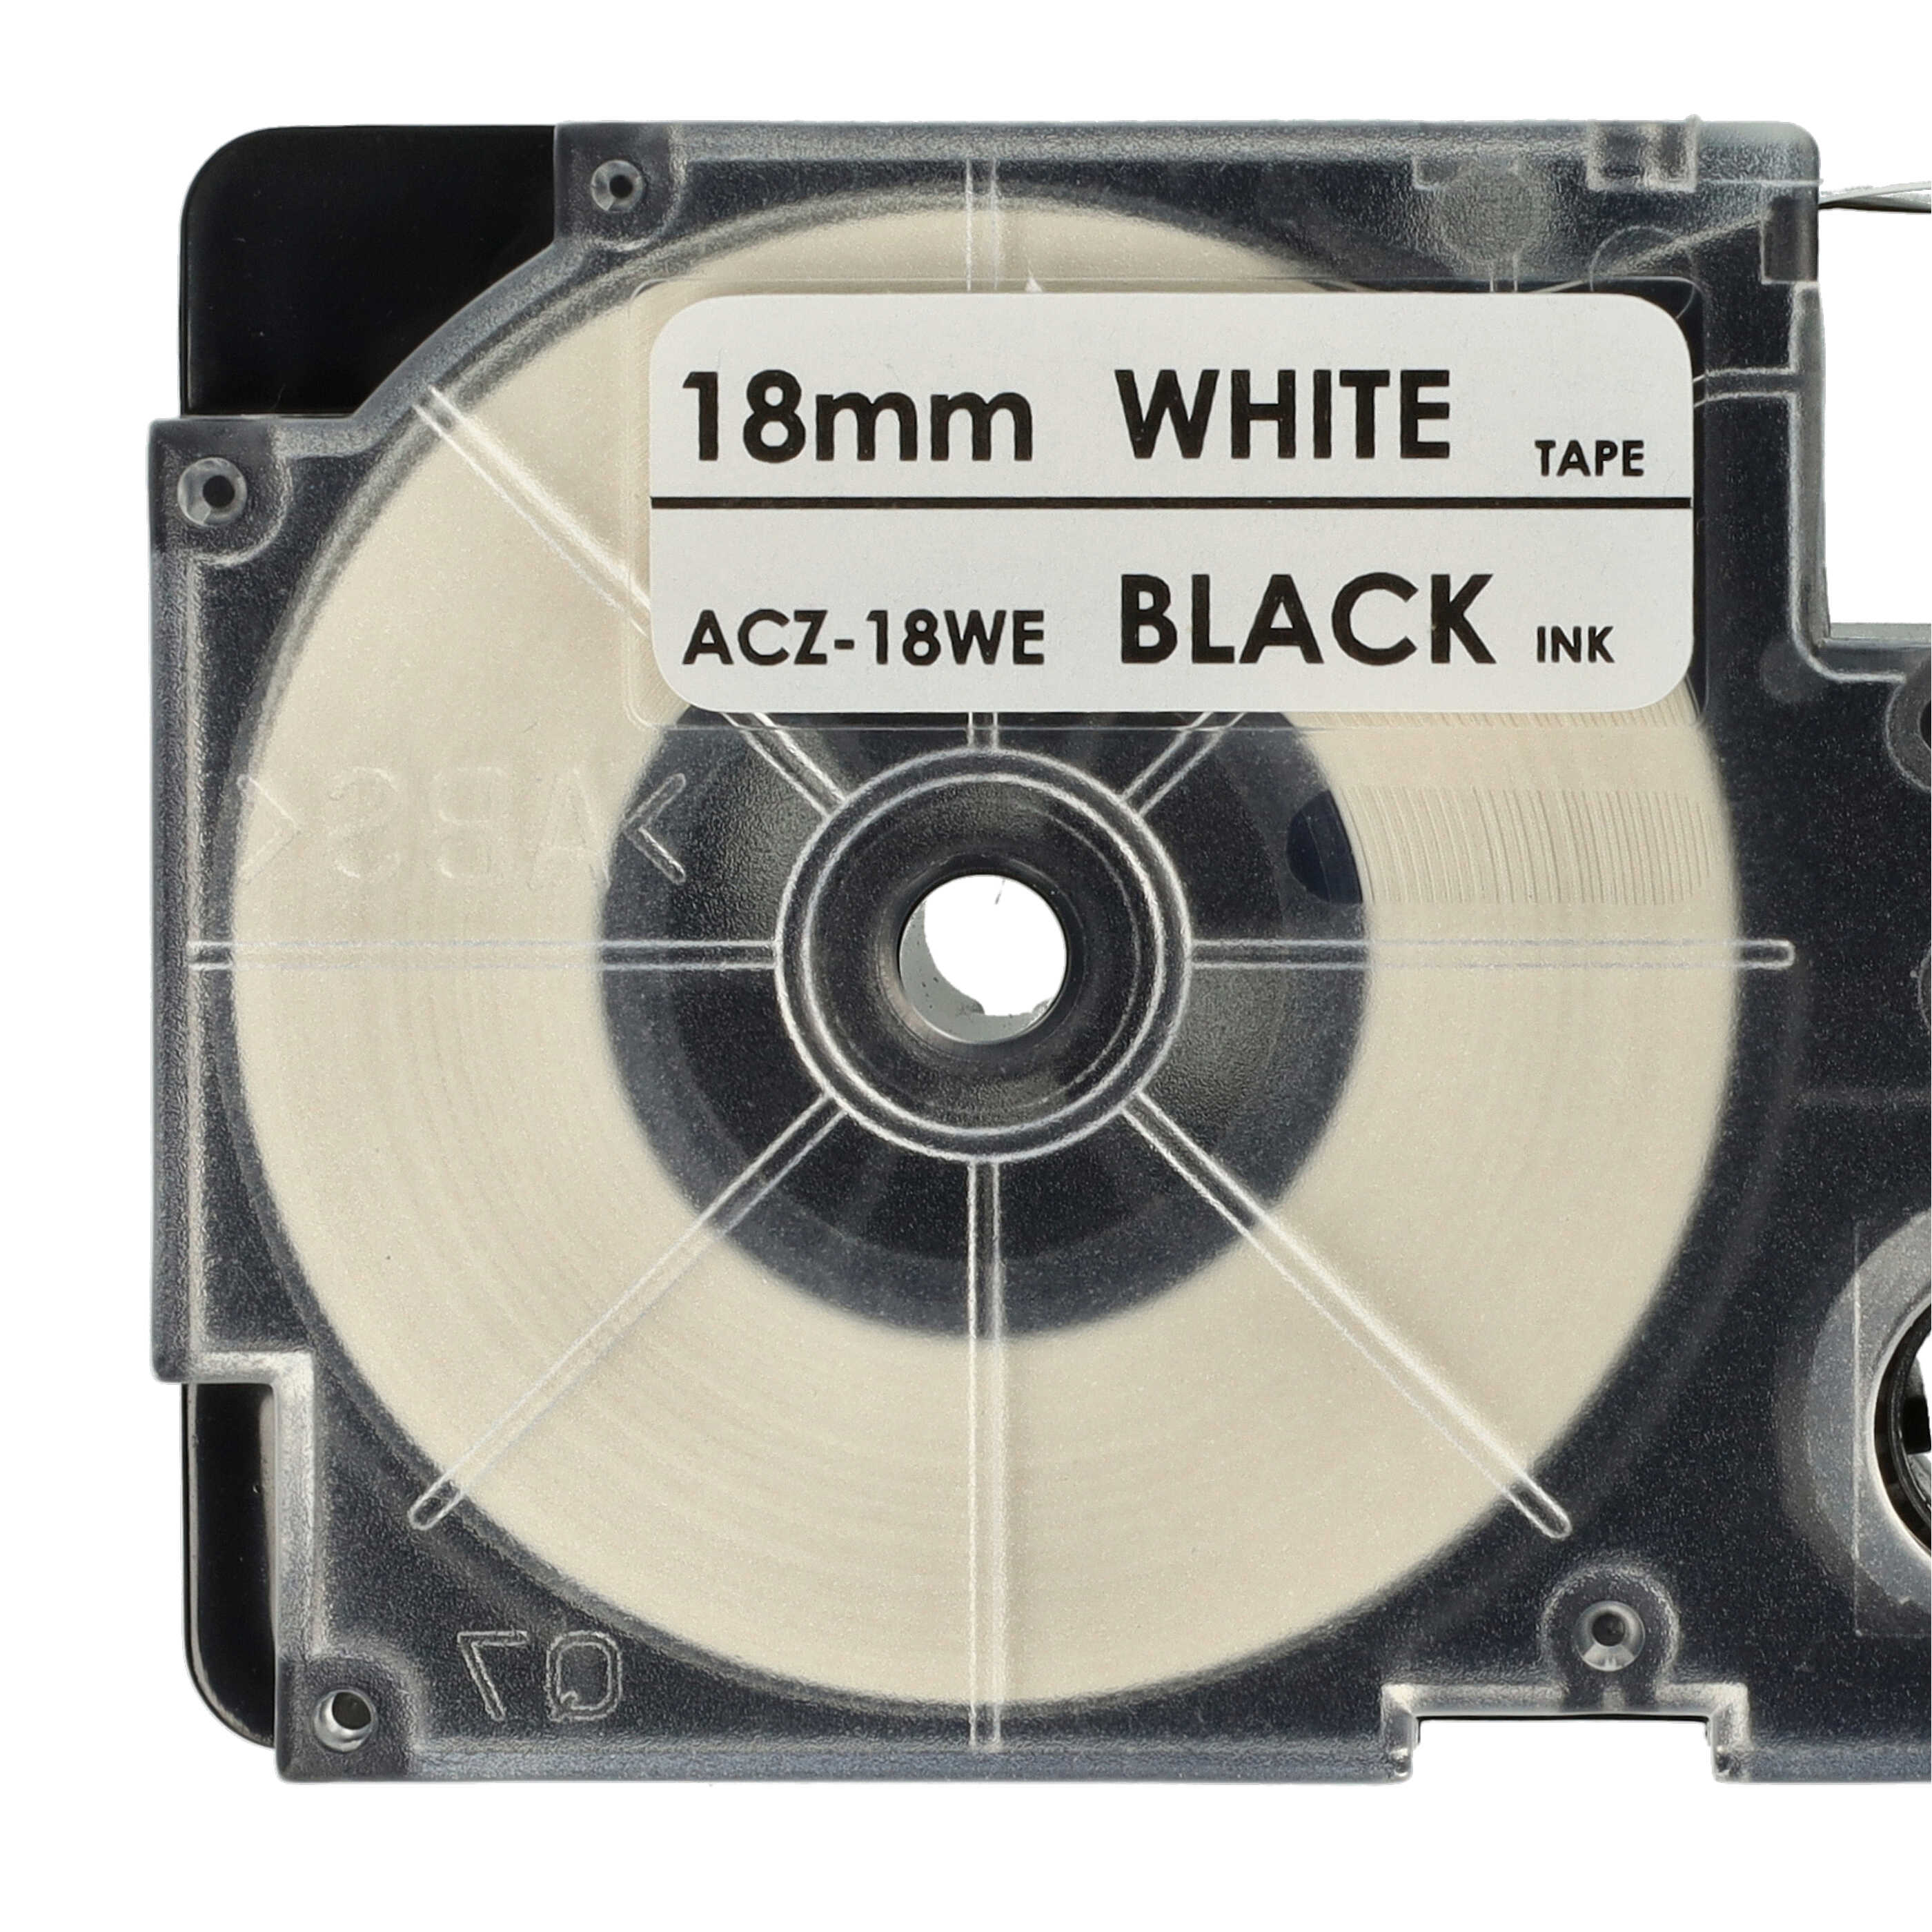 10x Label Tape as Replacement for Casio XR-18WE, XR-18WE1 - 18 mm Black to White